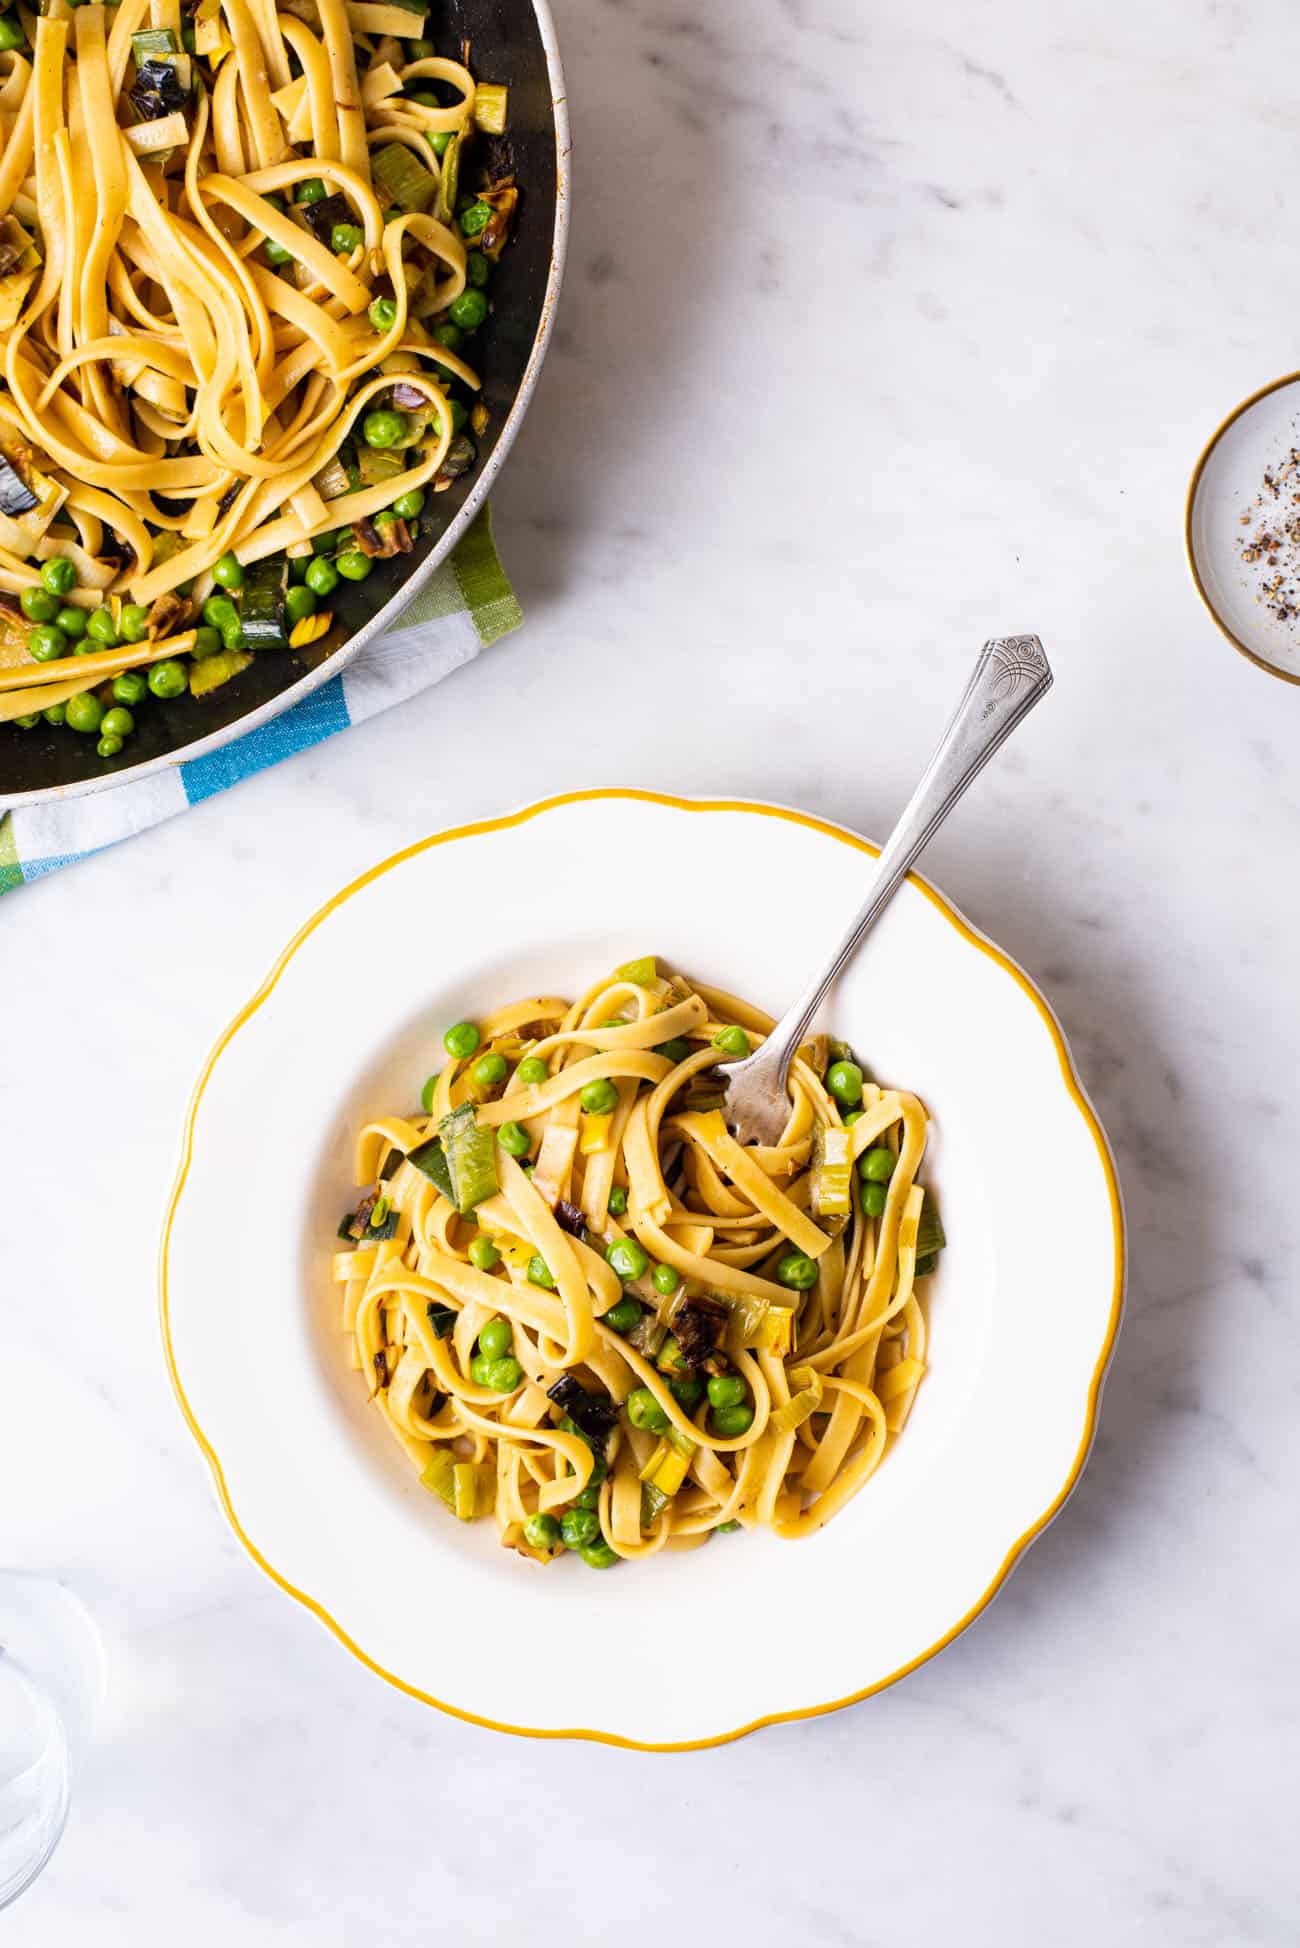 Vegan pasta with leeks and peas in a yellow-rimmed pasta bowl.